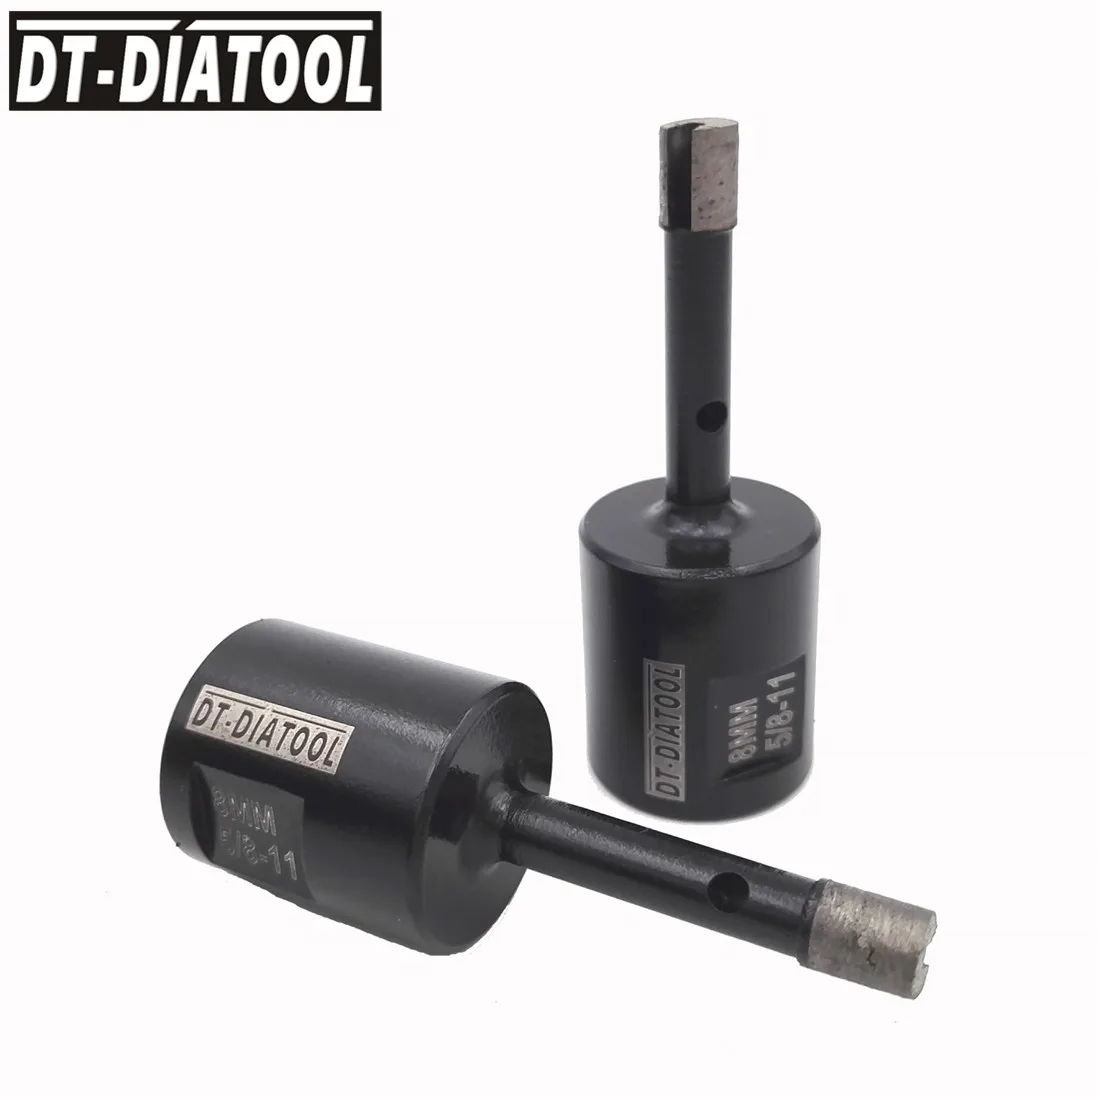 DT-DIATOOL 2pcs 5/8-11 Thread Dia 8mm Welded Diamond Drilling Core Bits Drill Bits For Drilling Marble Granite Stone Hole Saw dt diatool 2pcs 5 8 11thread dia20mm laser welded crown segments diamond dry drilling core bits hard granite marble nature stone